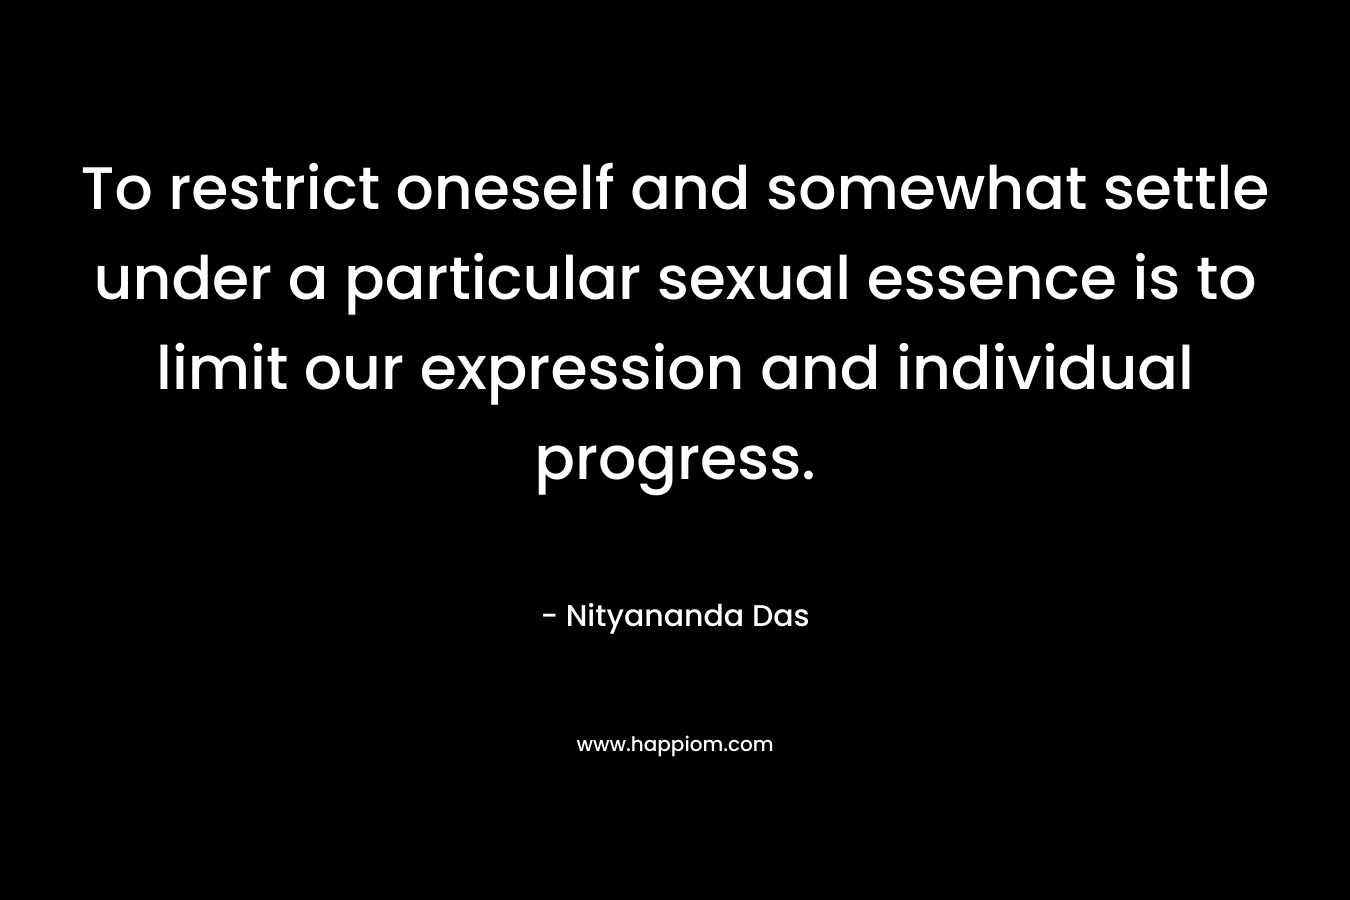 To restrict oneself and somewhat settle under a particular sexual essence is to limit our expression and individual progress. – Nityananda Das